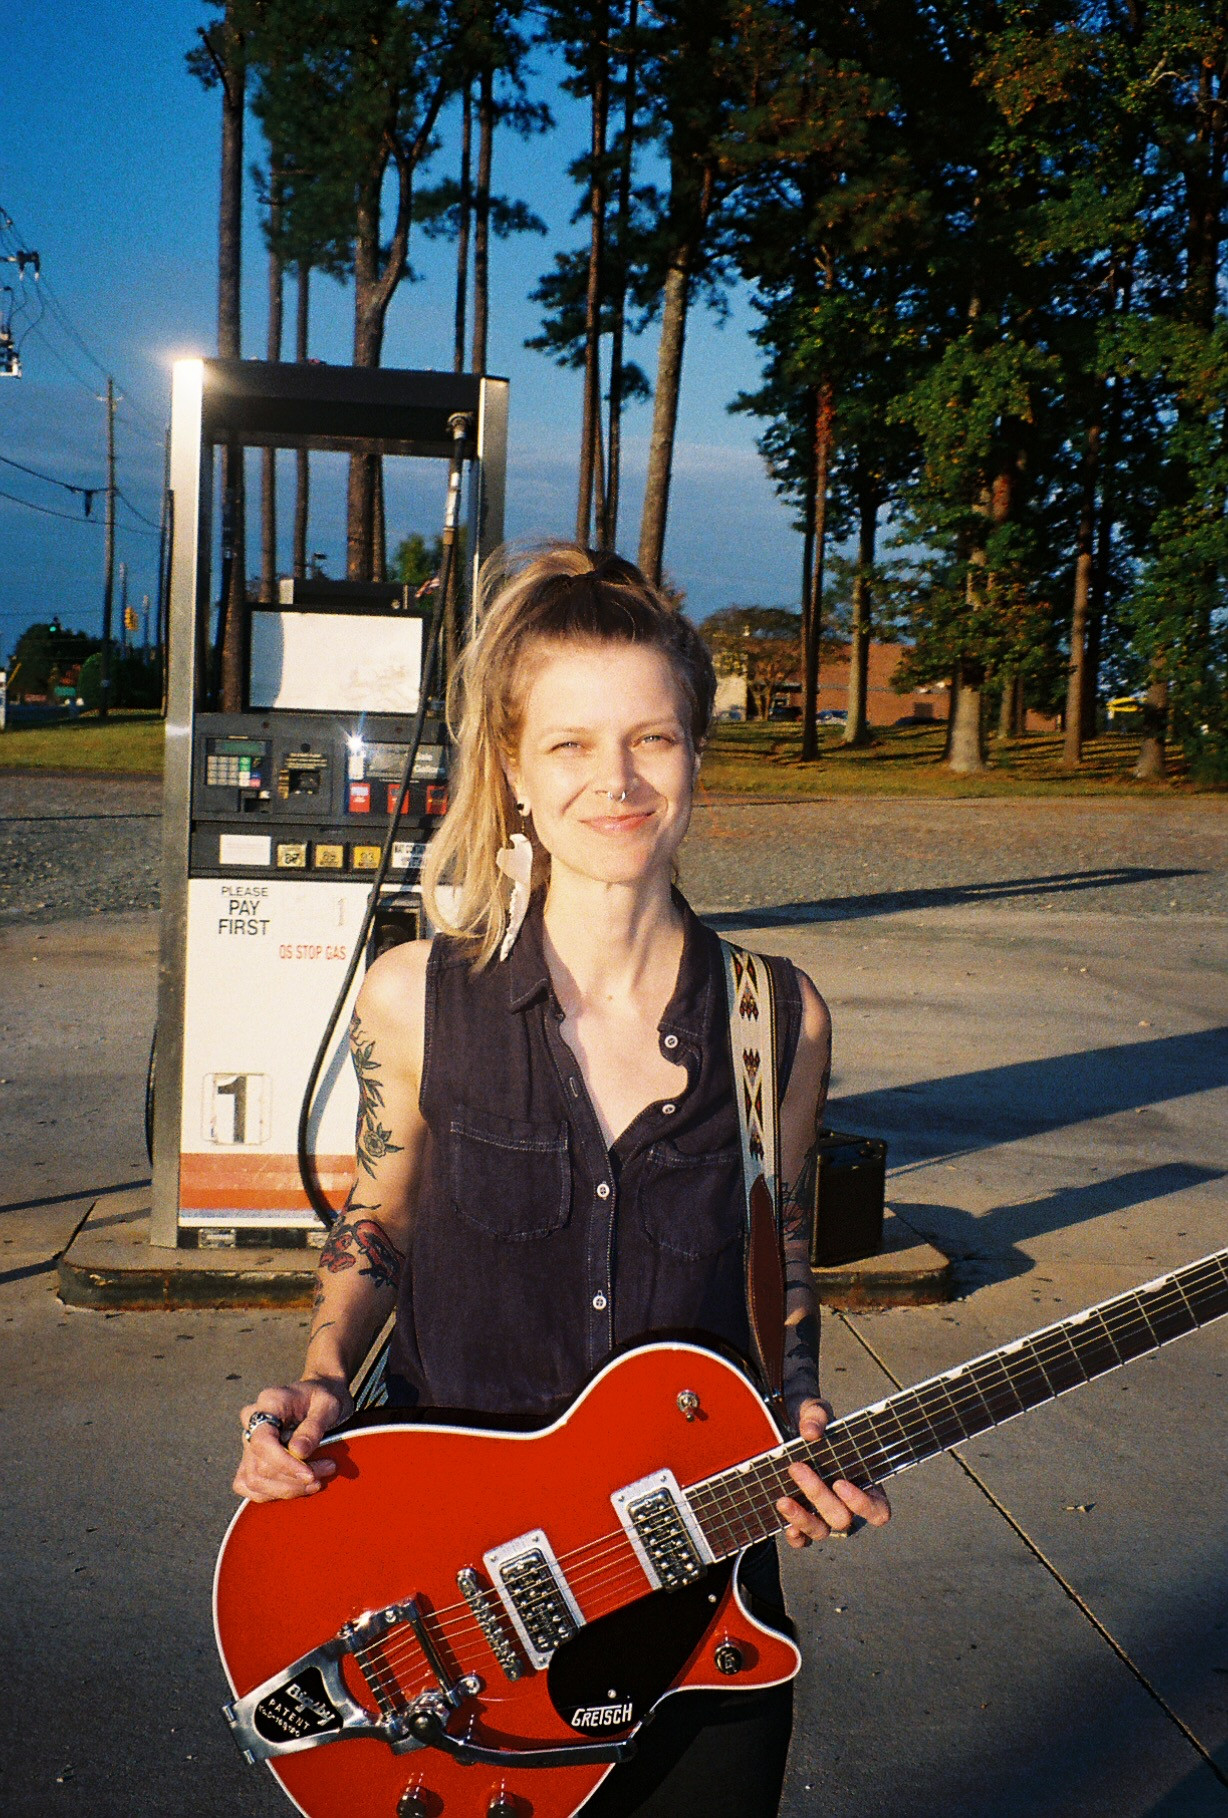 A woman holding a red electric guitar